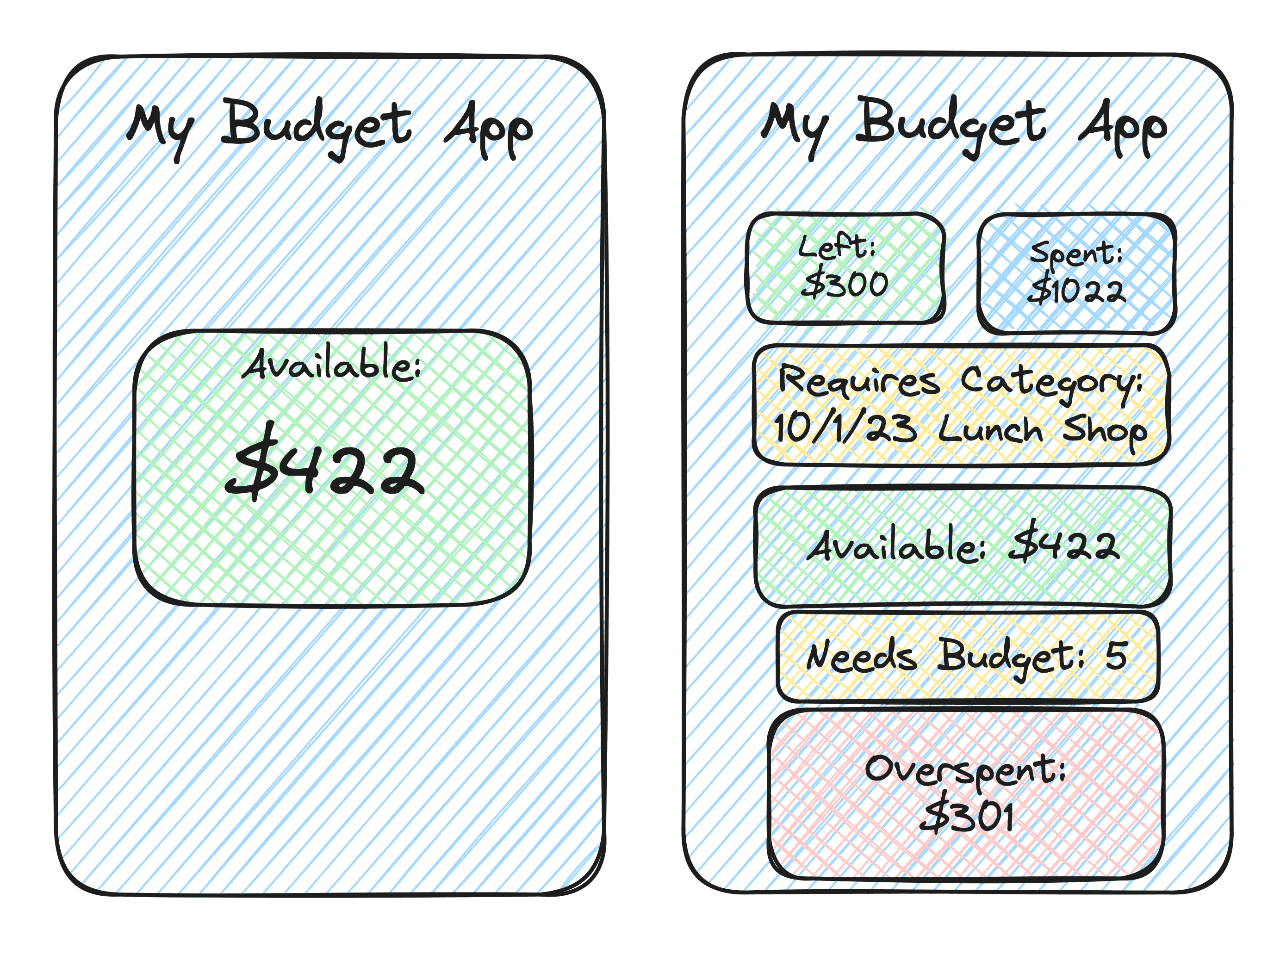 Mockup of two different budget apps, one with a very simple screen, one with lots of data showing